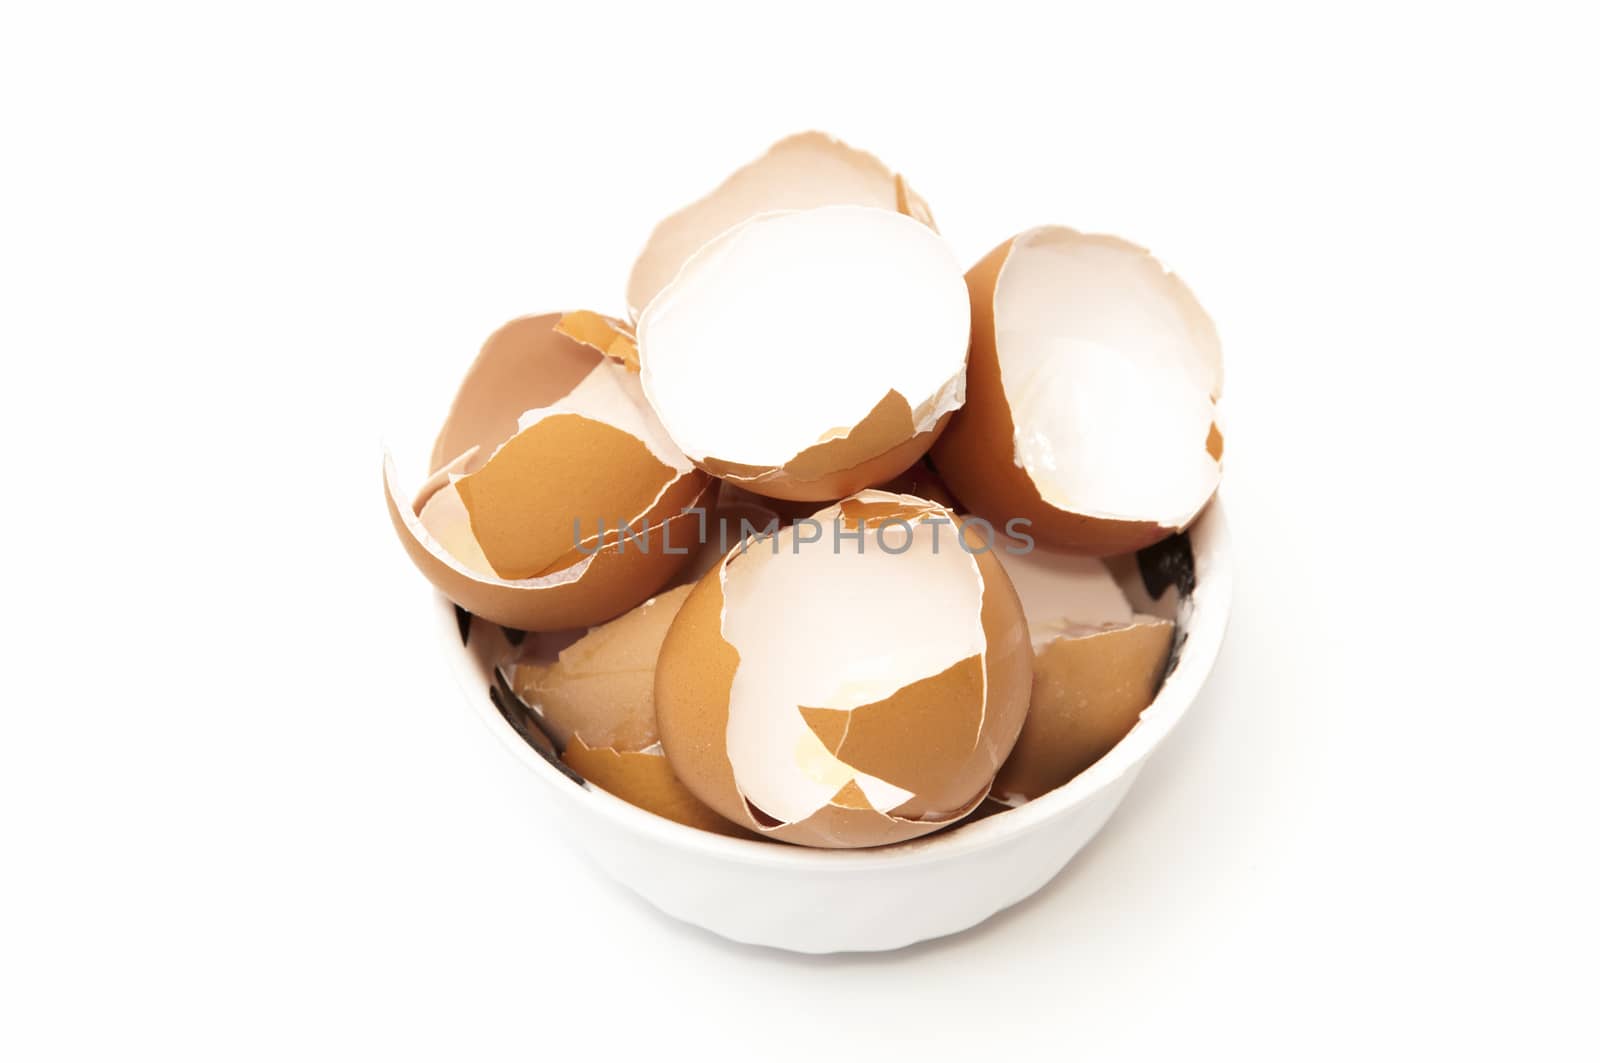 bowl with broken egg on a white background